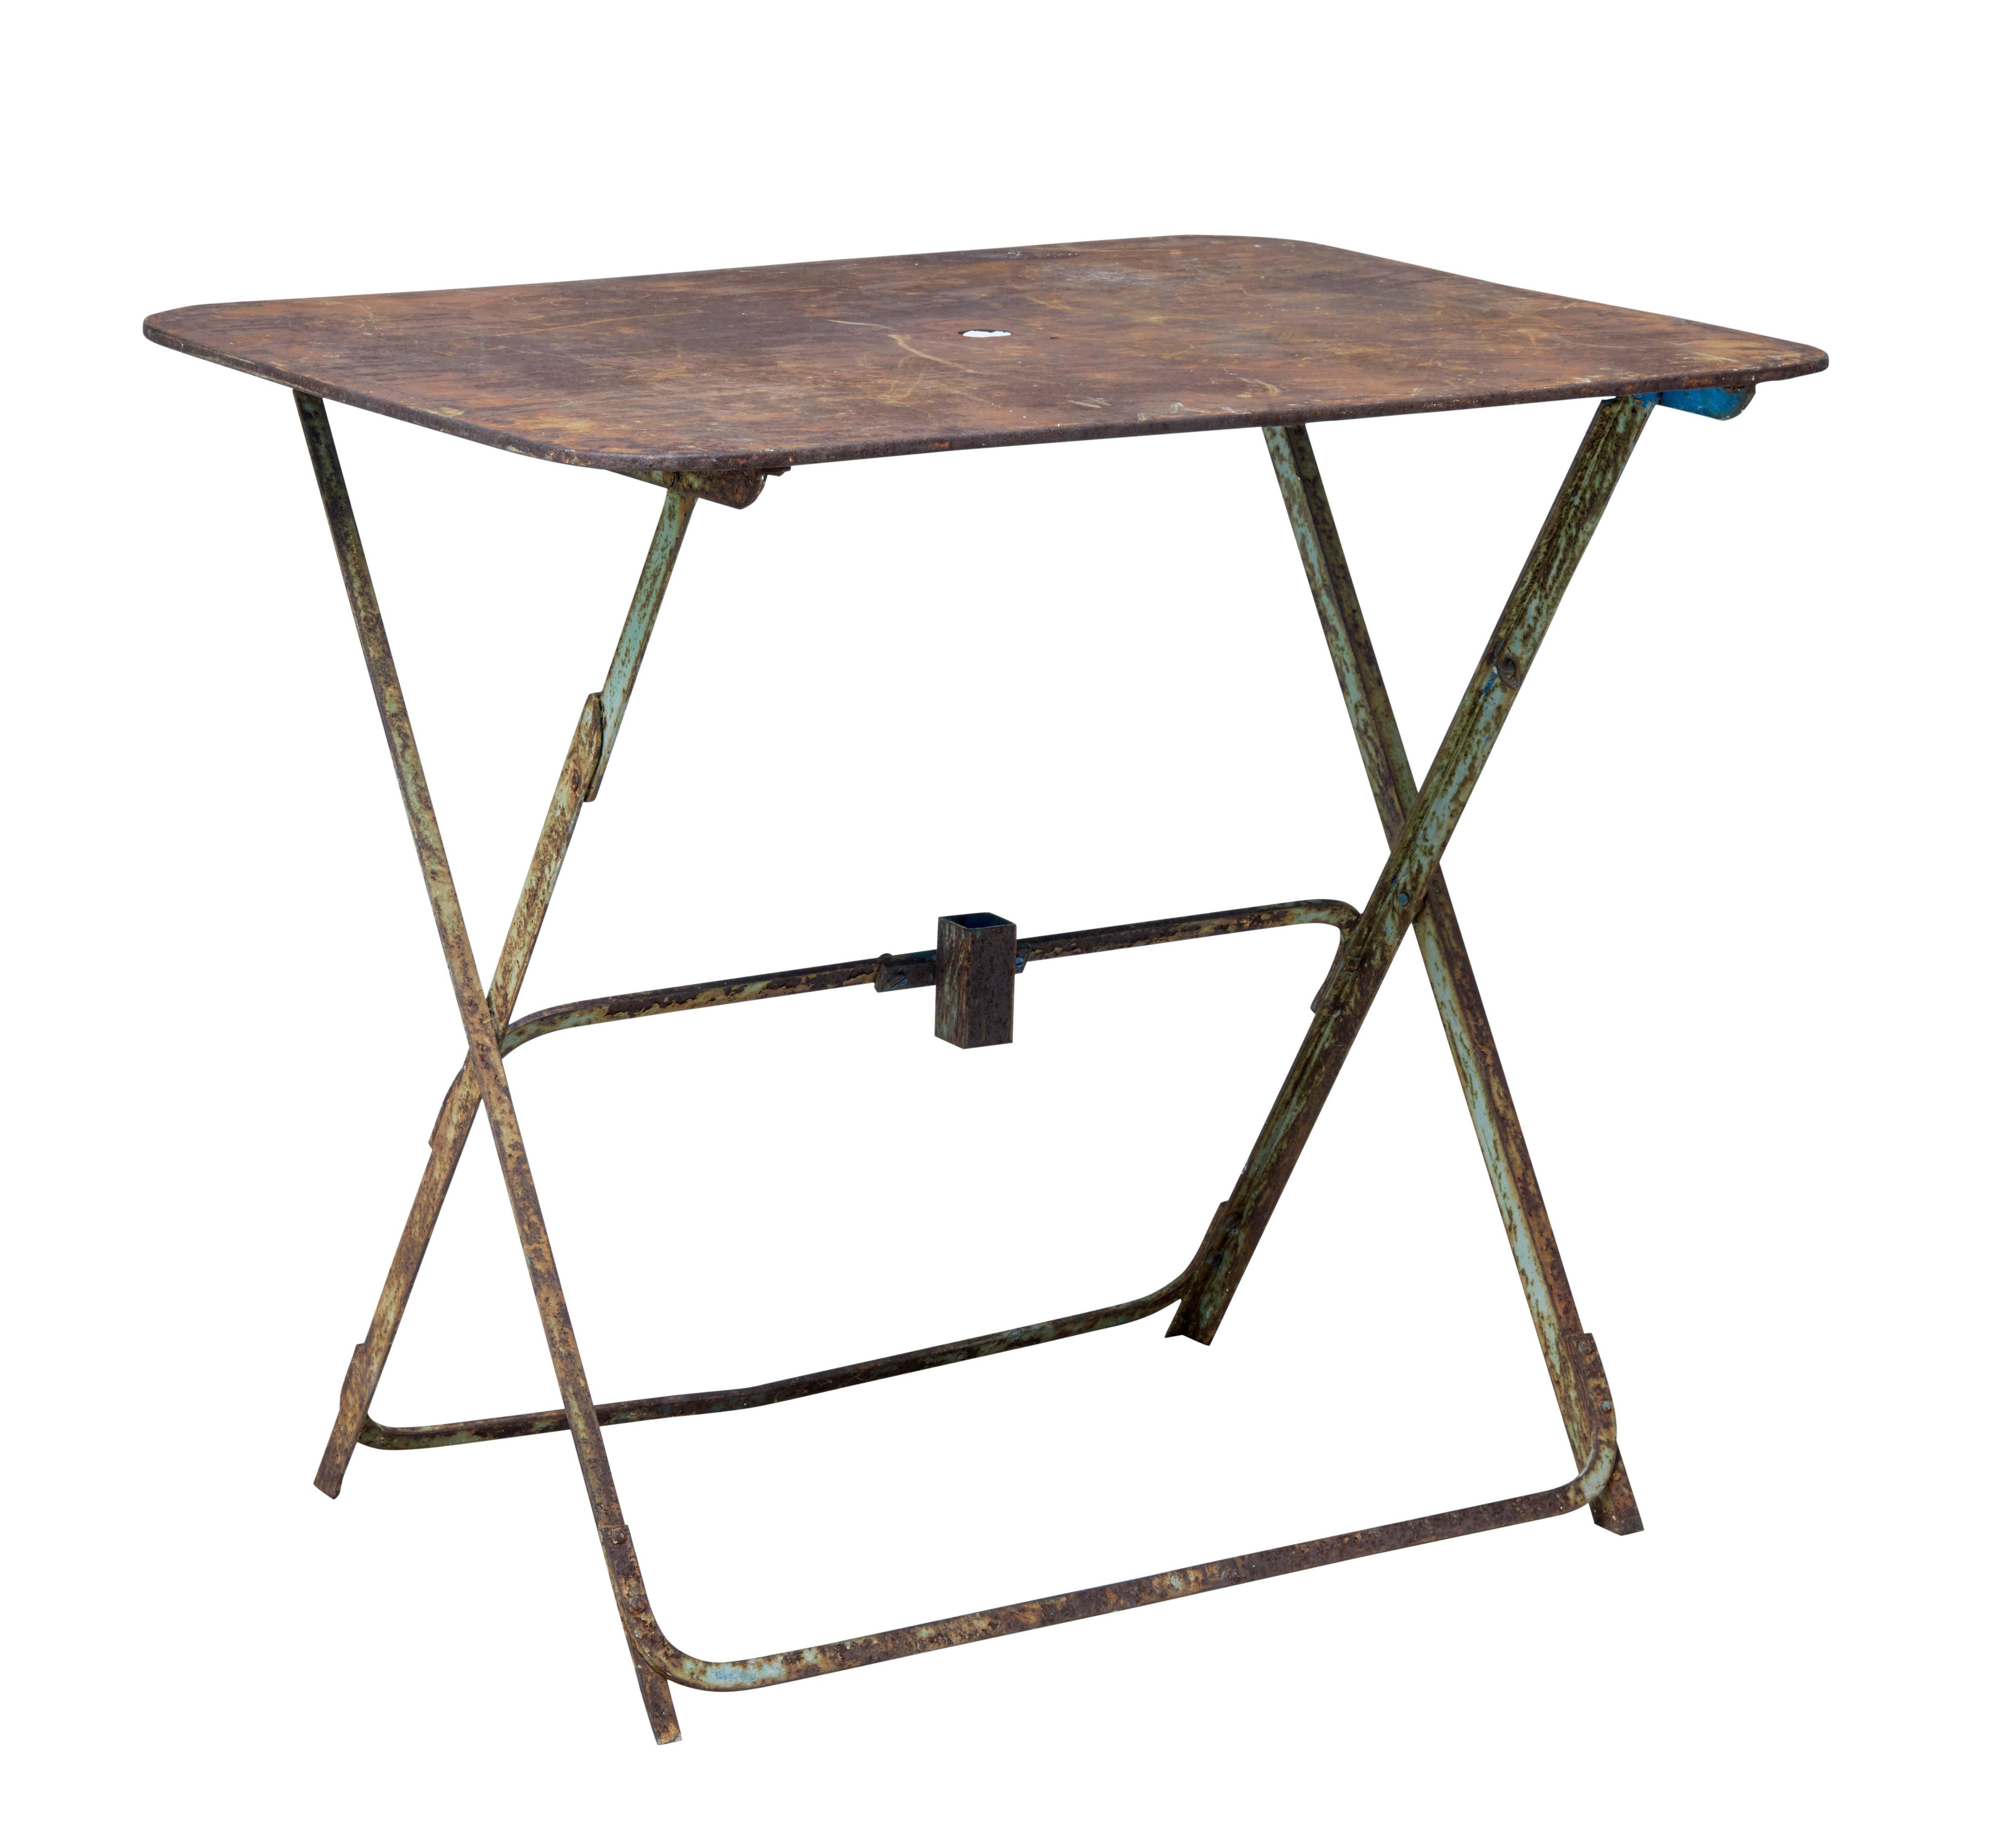 Good quality rectangular metal garden table from the 1920s.

Desirable bare rusted metal top with small parasol hole. Standing on folding base with traces of original paint.

Good example of a practical table for the garden or summer house.